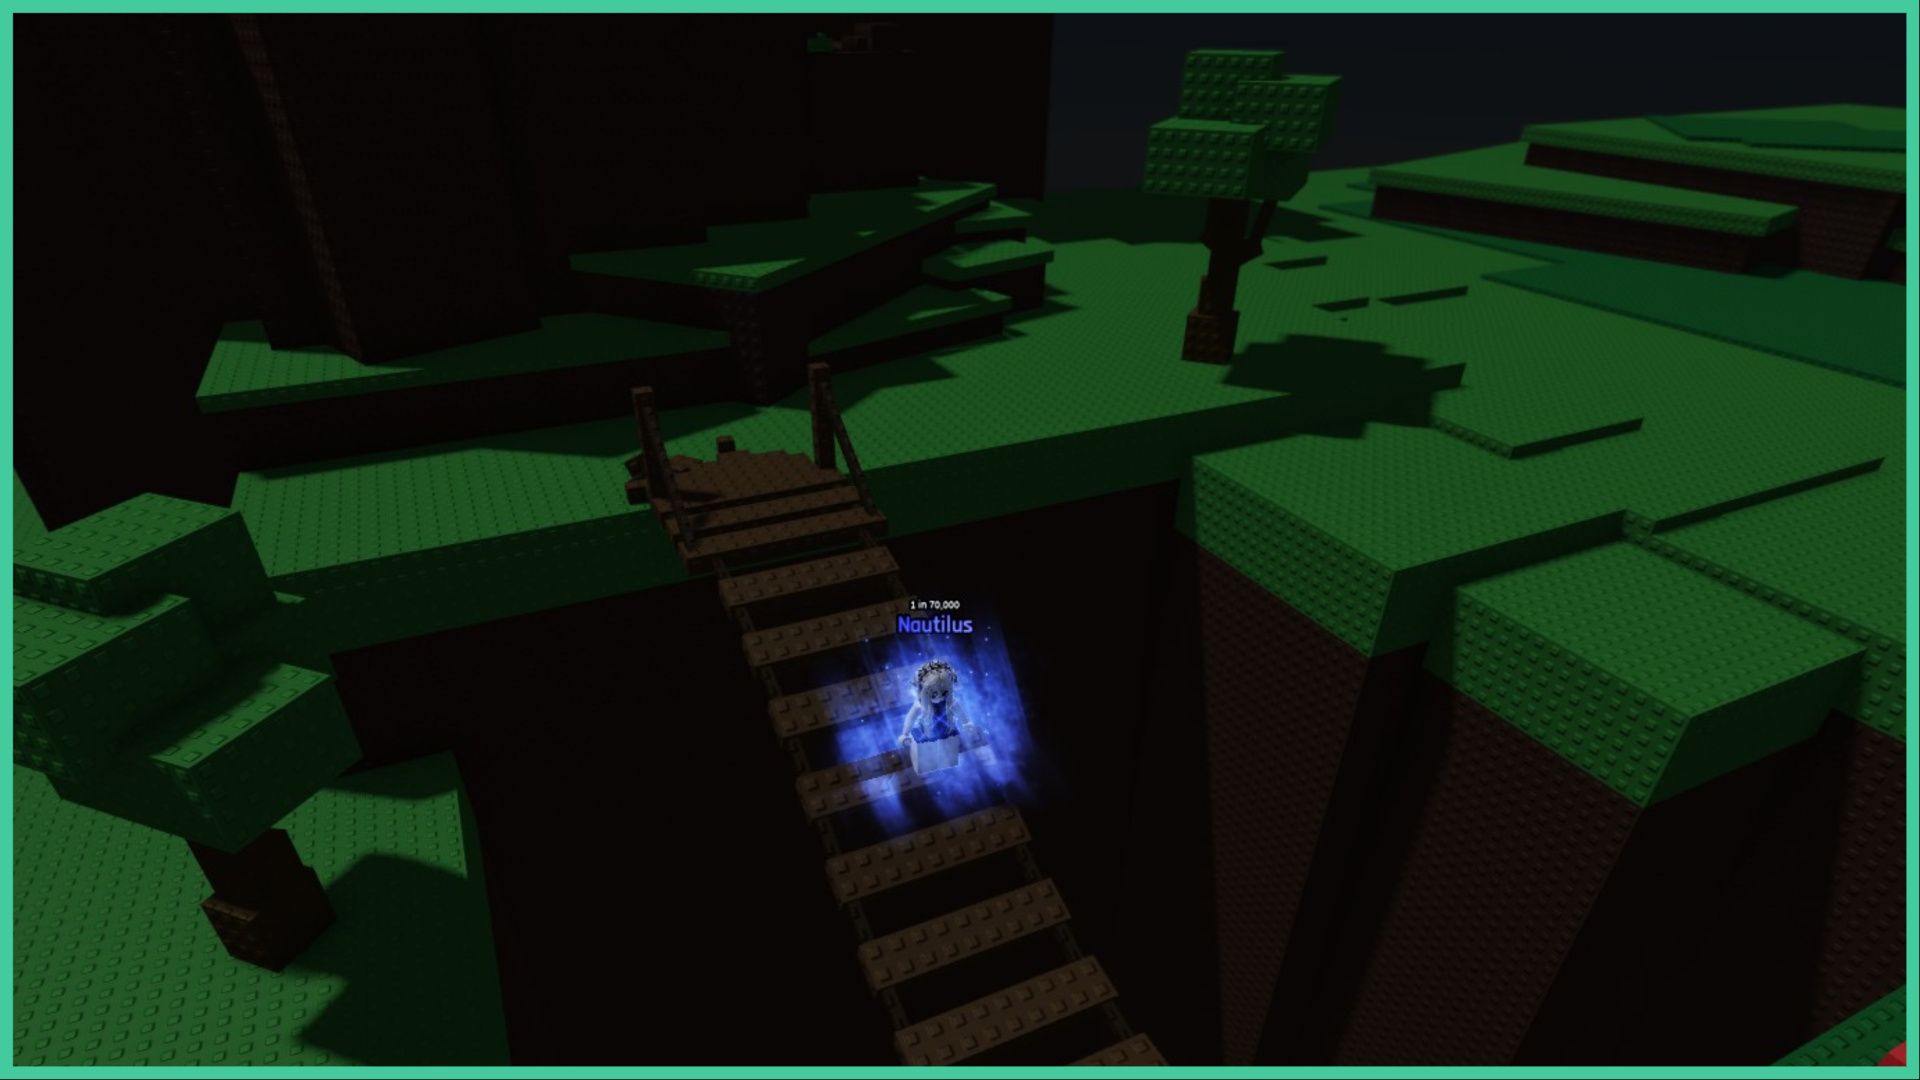 feature image for our sol's rng undefined guide, the image features a screenshot from the game of a roblox character standing on a wooden bridge across a hole in the middle of the grass hills, there are trees dotted around